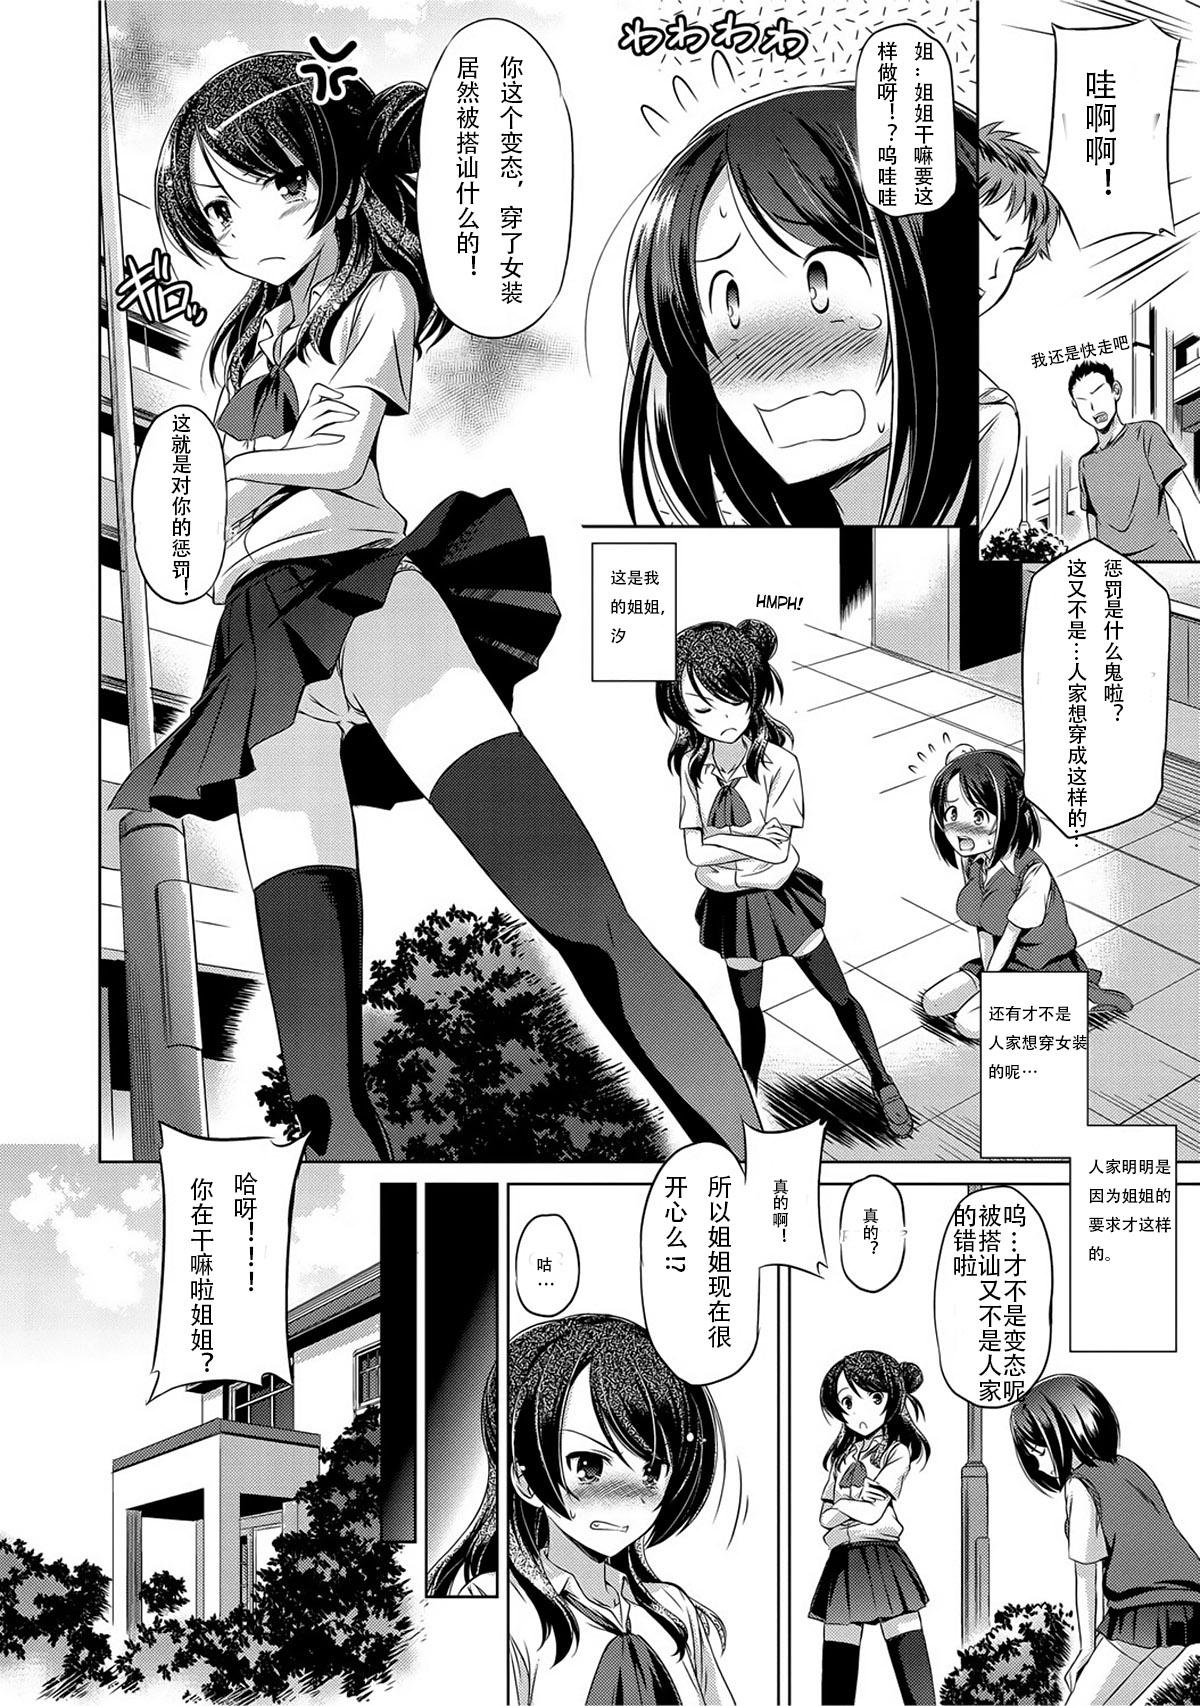 Asian Babes Minna no Hoshii Mono | The Thing that Everyone Wants Rough - Page 2